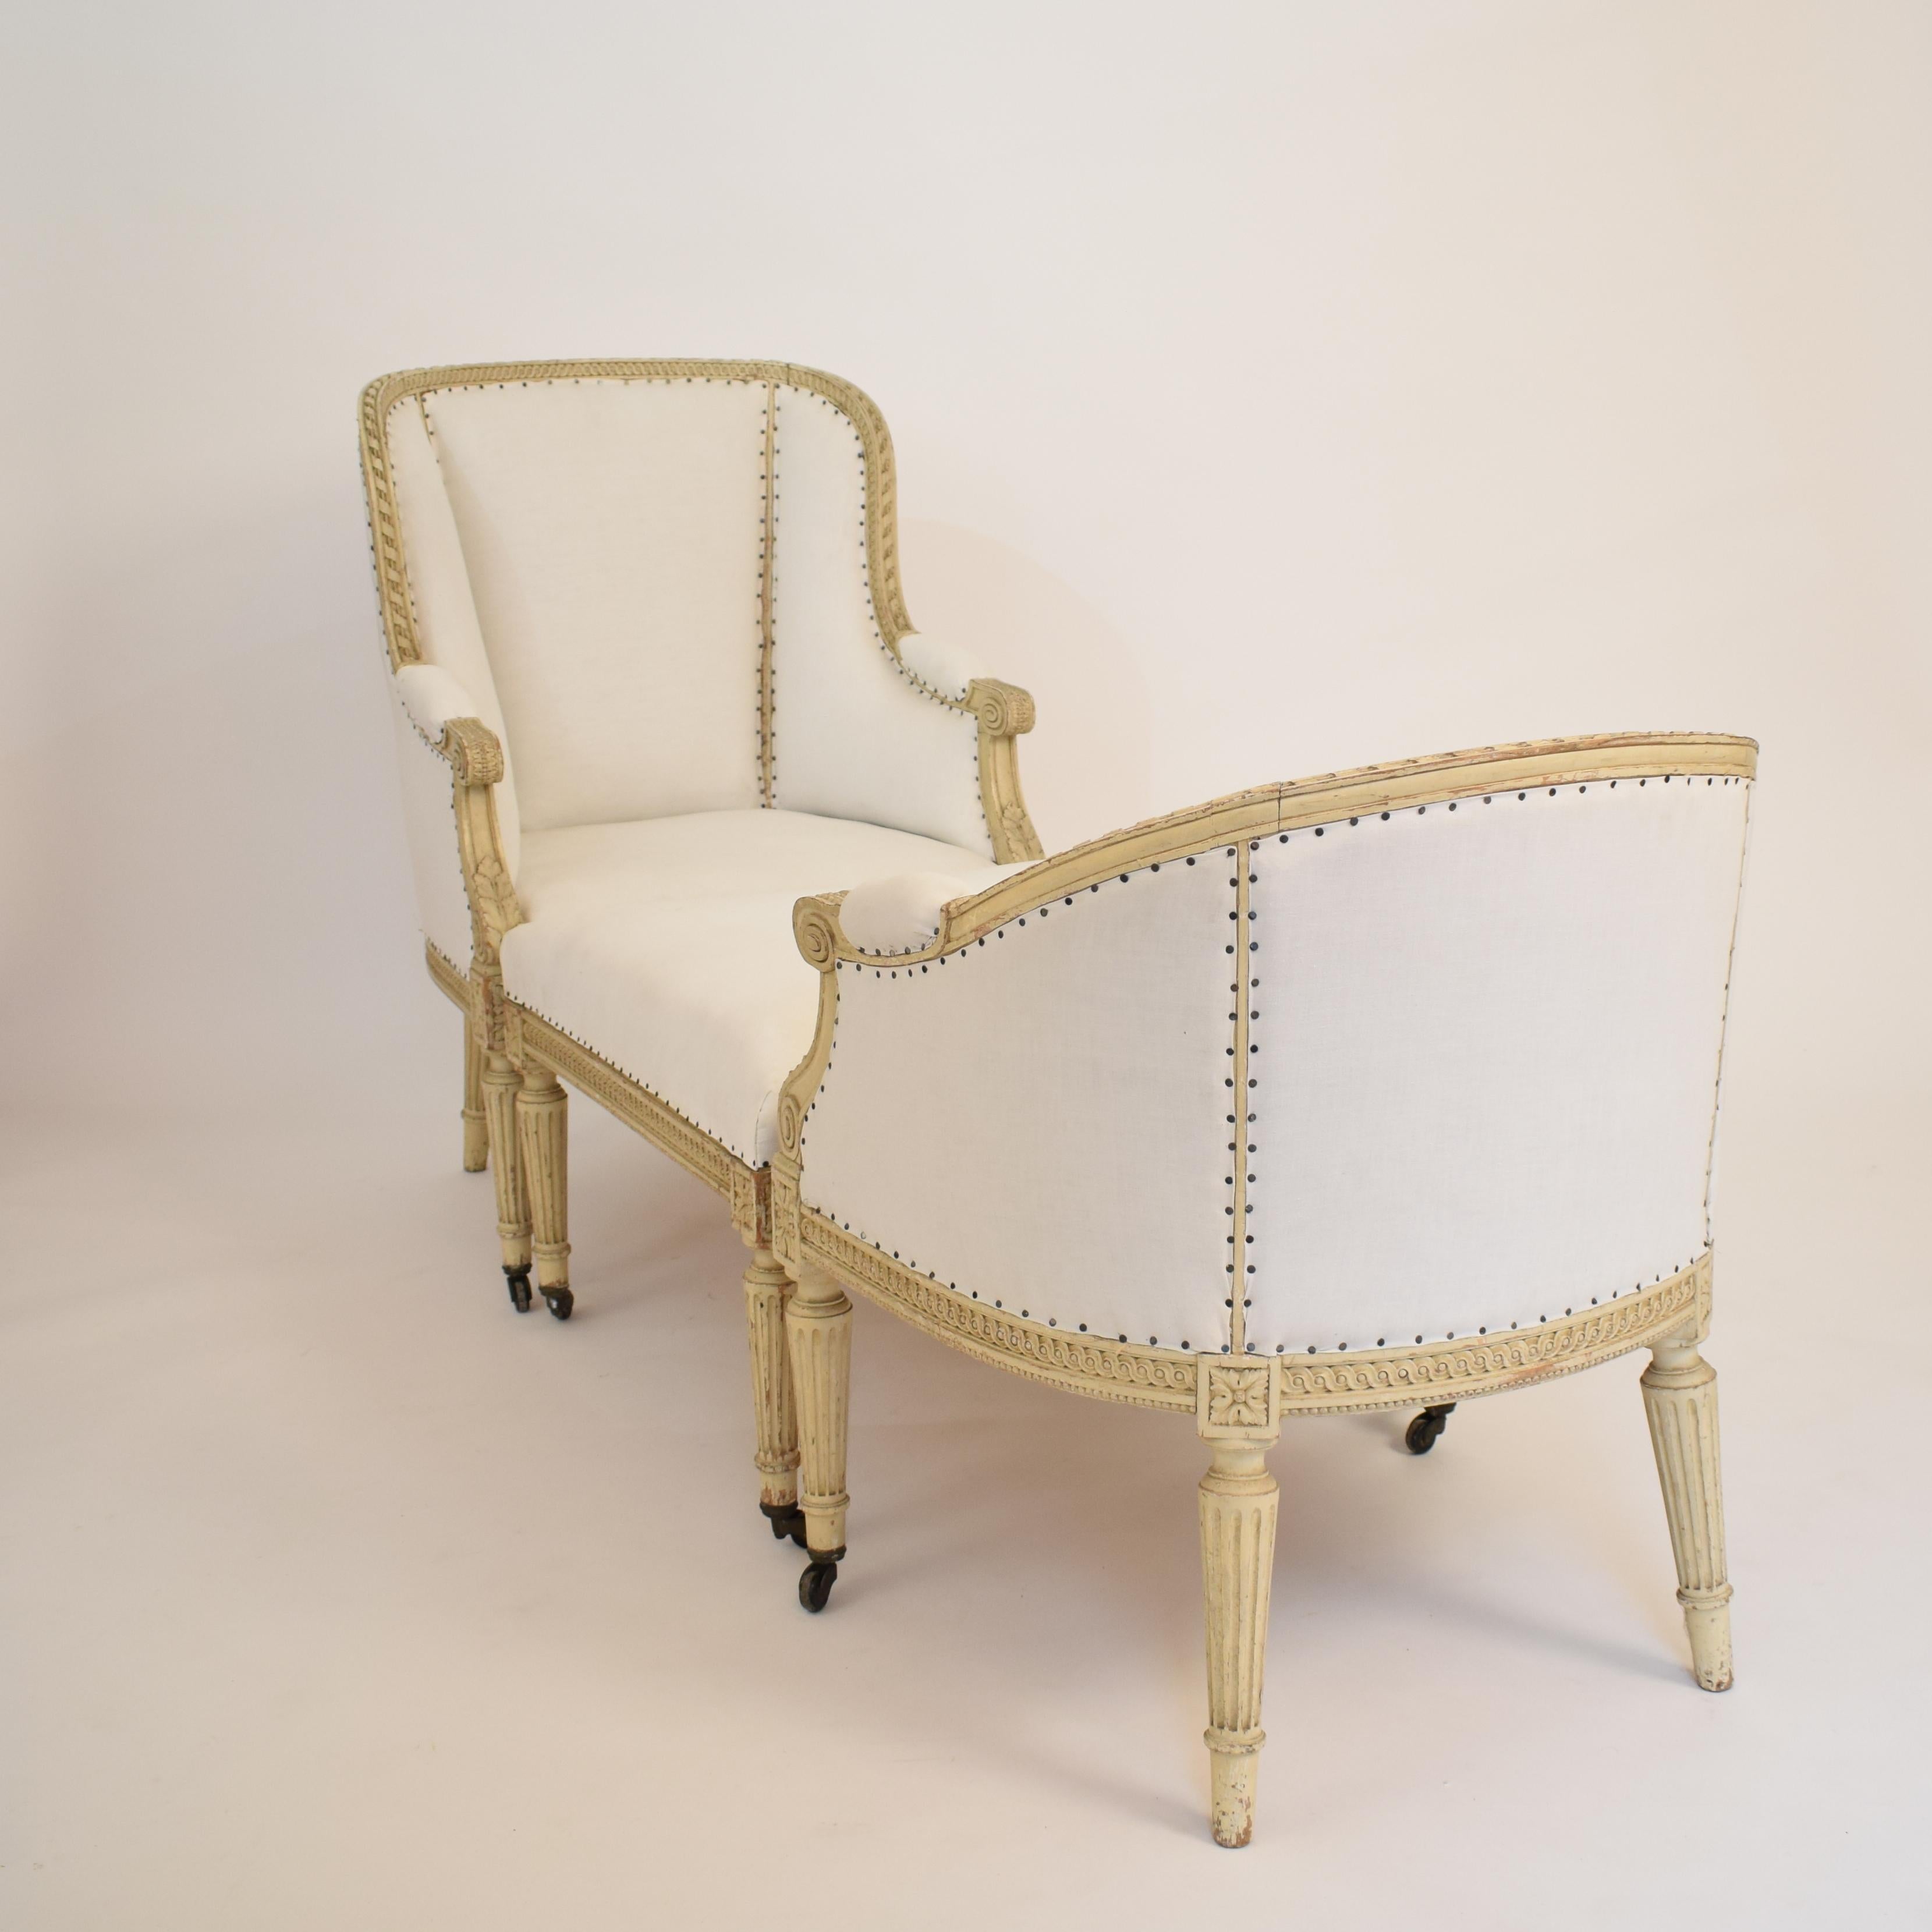 This beautiful Duchesse Brisee comes in the original Lacquer and was re-upholstered.
It was made in the 1850s in the Louis XVI style.
 